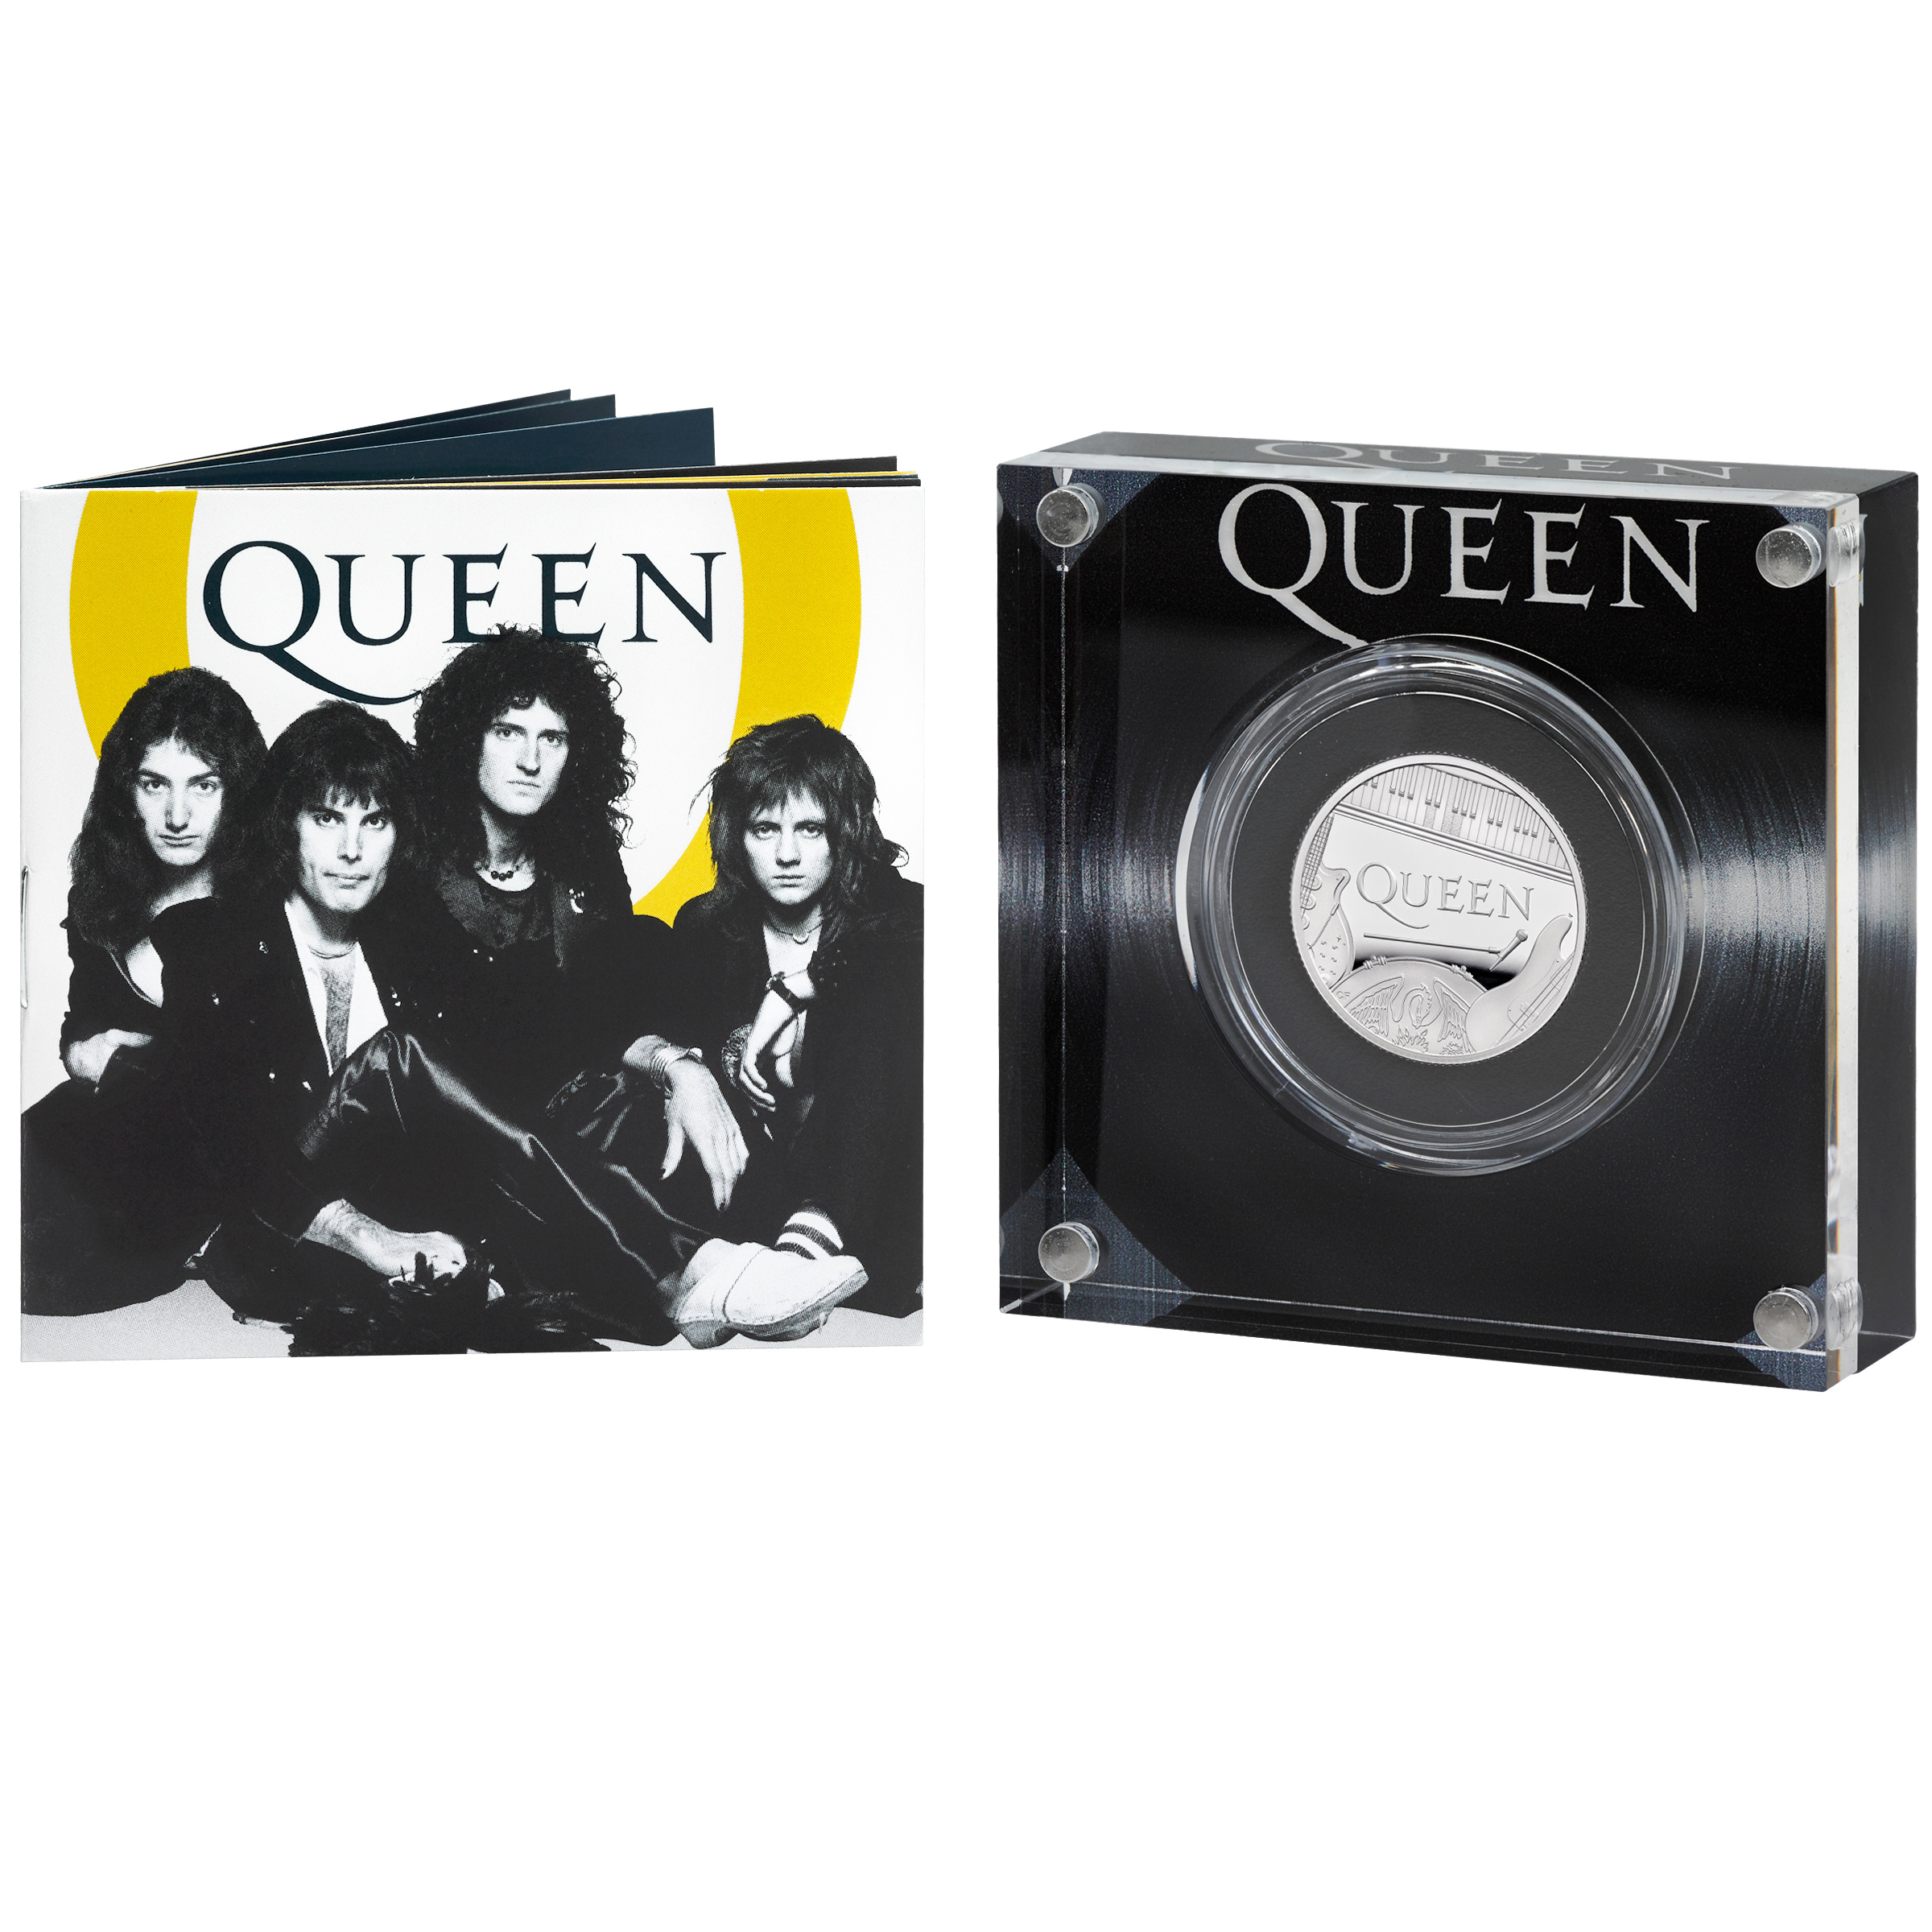 Queen rock music group celebrated with 2020 commemorative coins